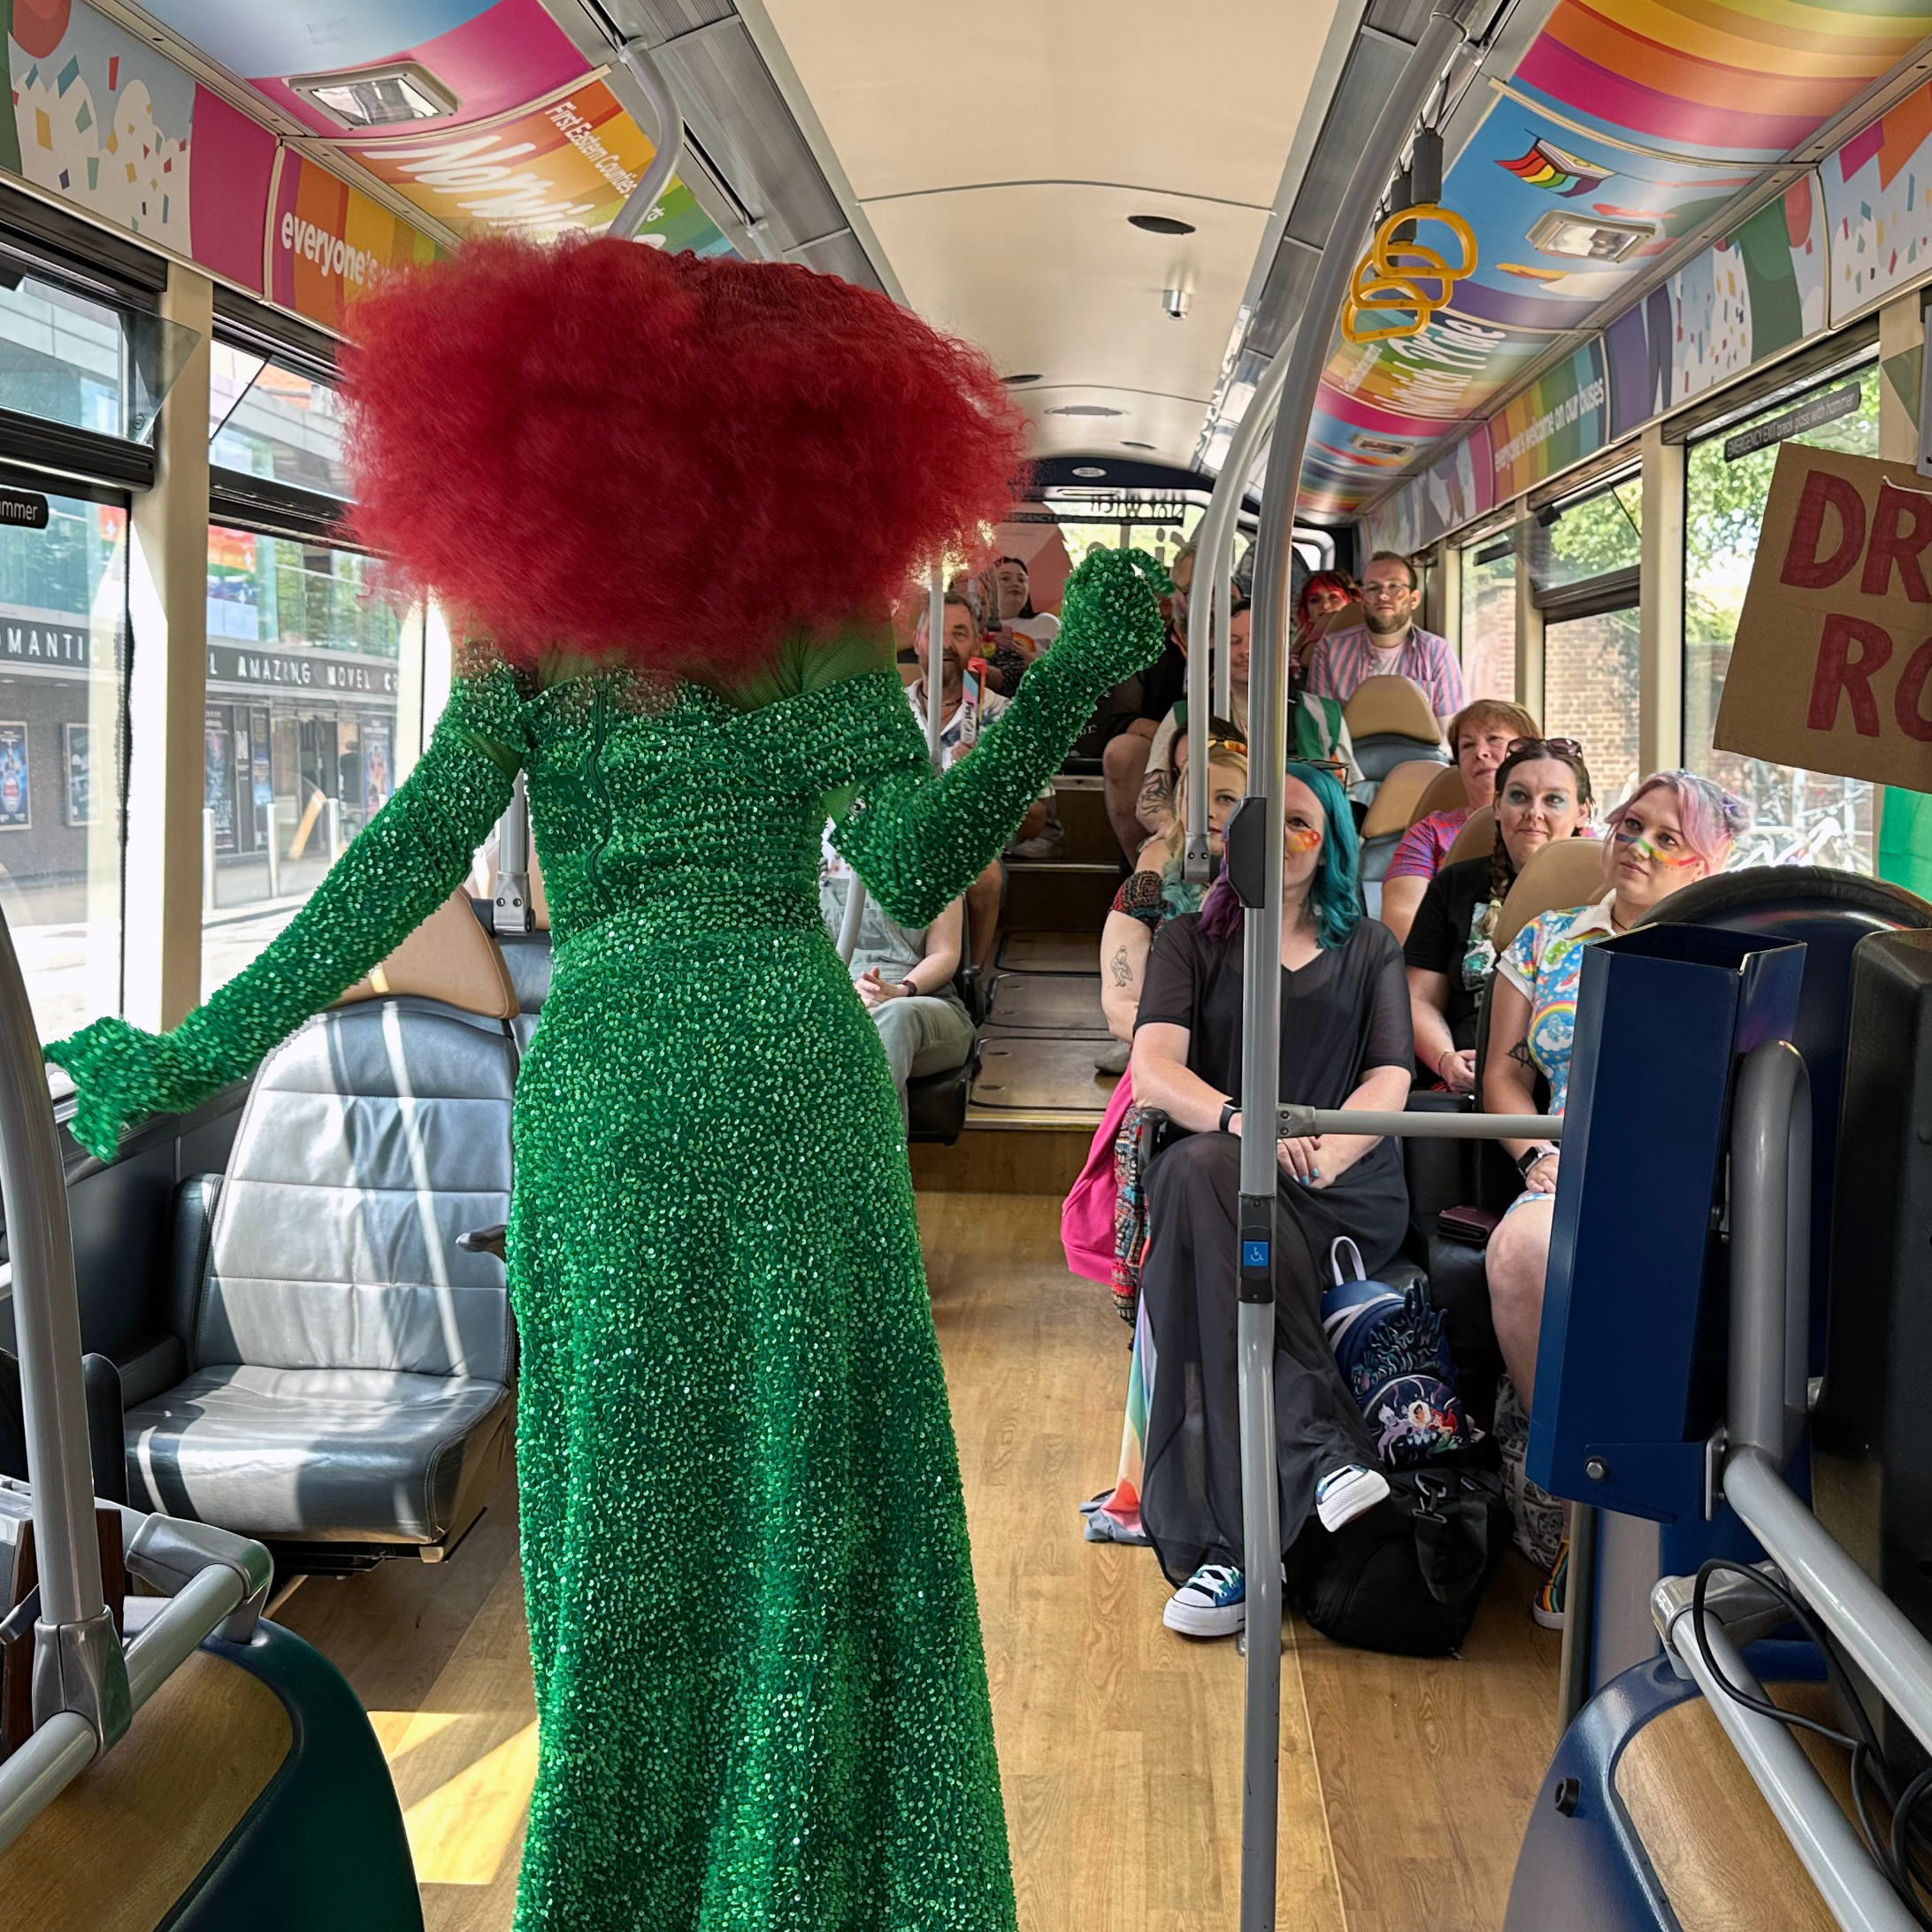 Drag queen Jester Mirage performing on-board the bus at the Norwich Pride event.